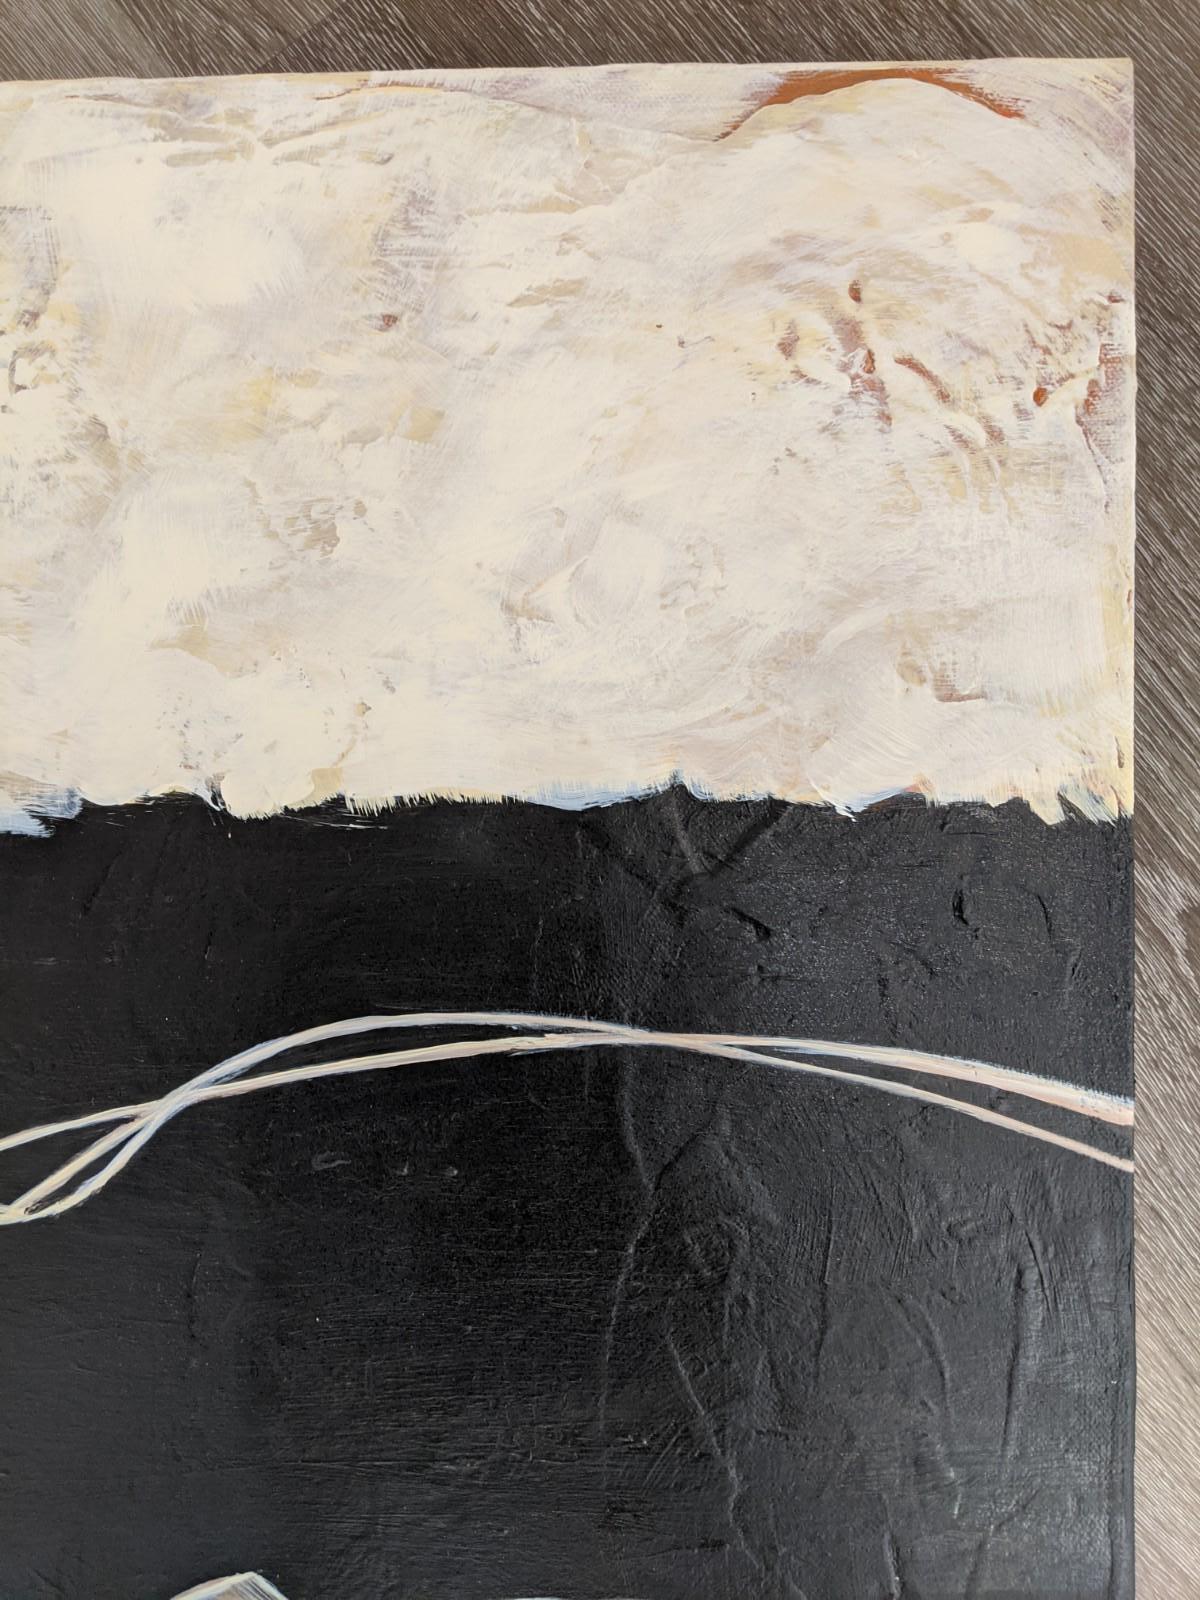 Endeavor Diptych - Two Toned Expressionist Acrylic Paintings Black and Cream - White Abstract Painting by Helen Bellaver